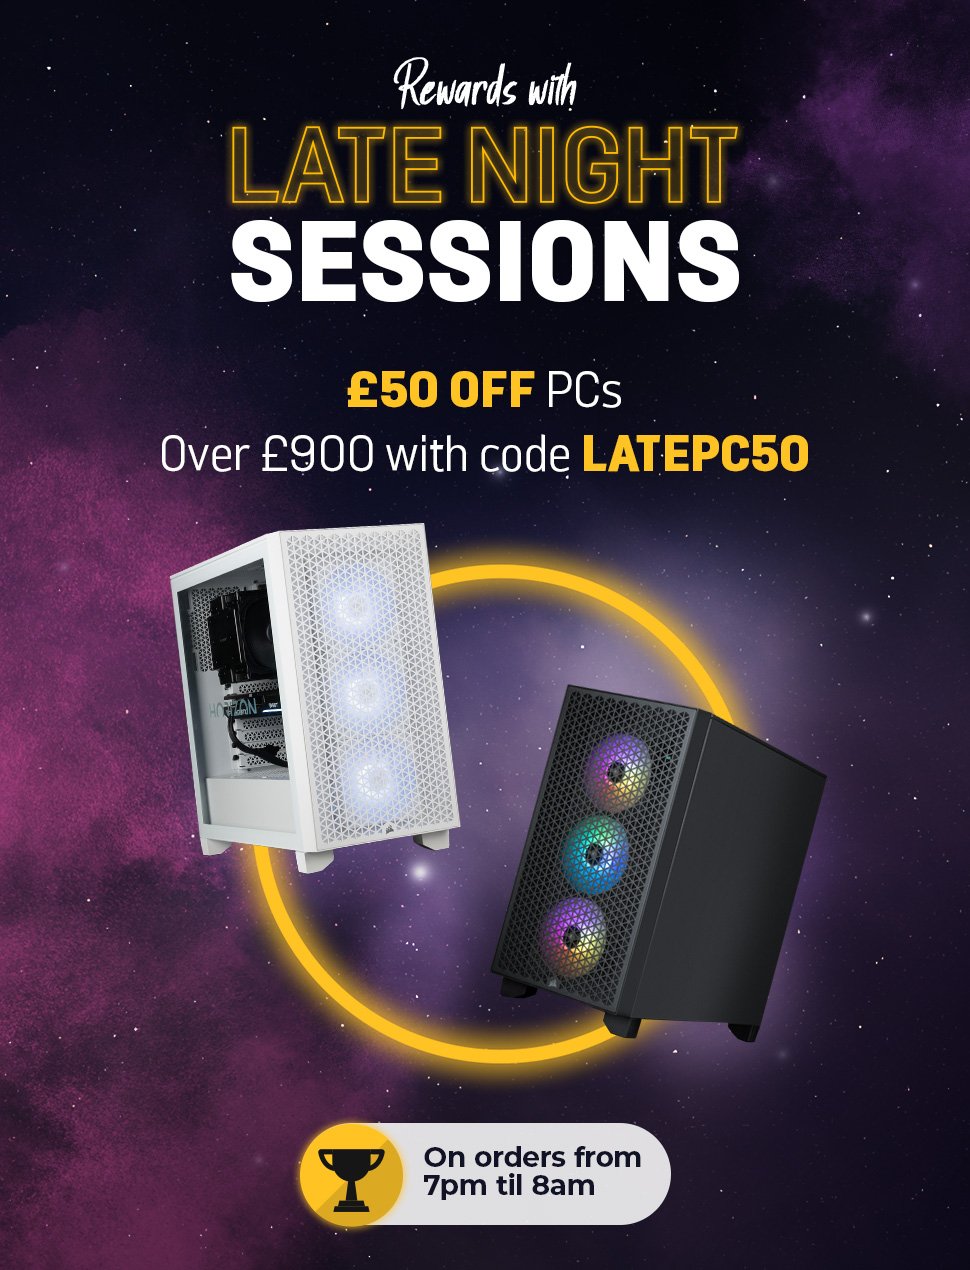 Late Night Sessions PC Promo